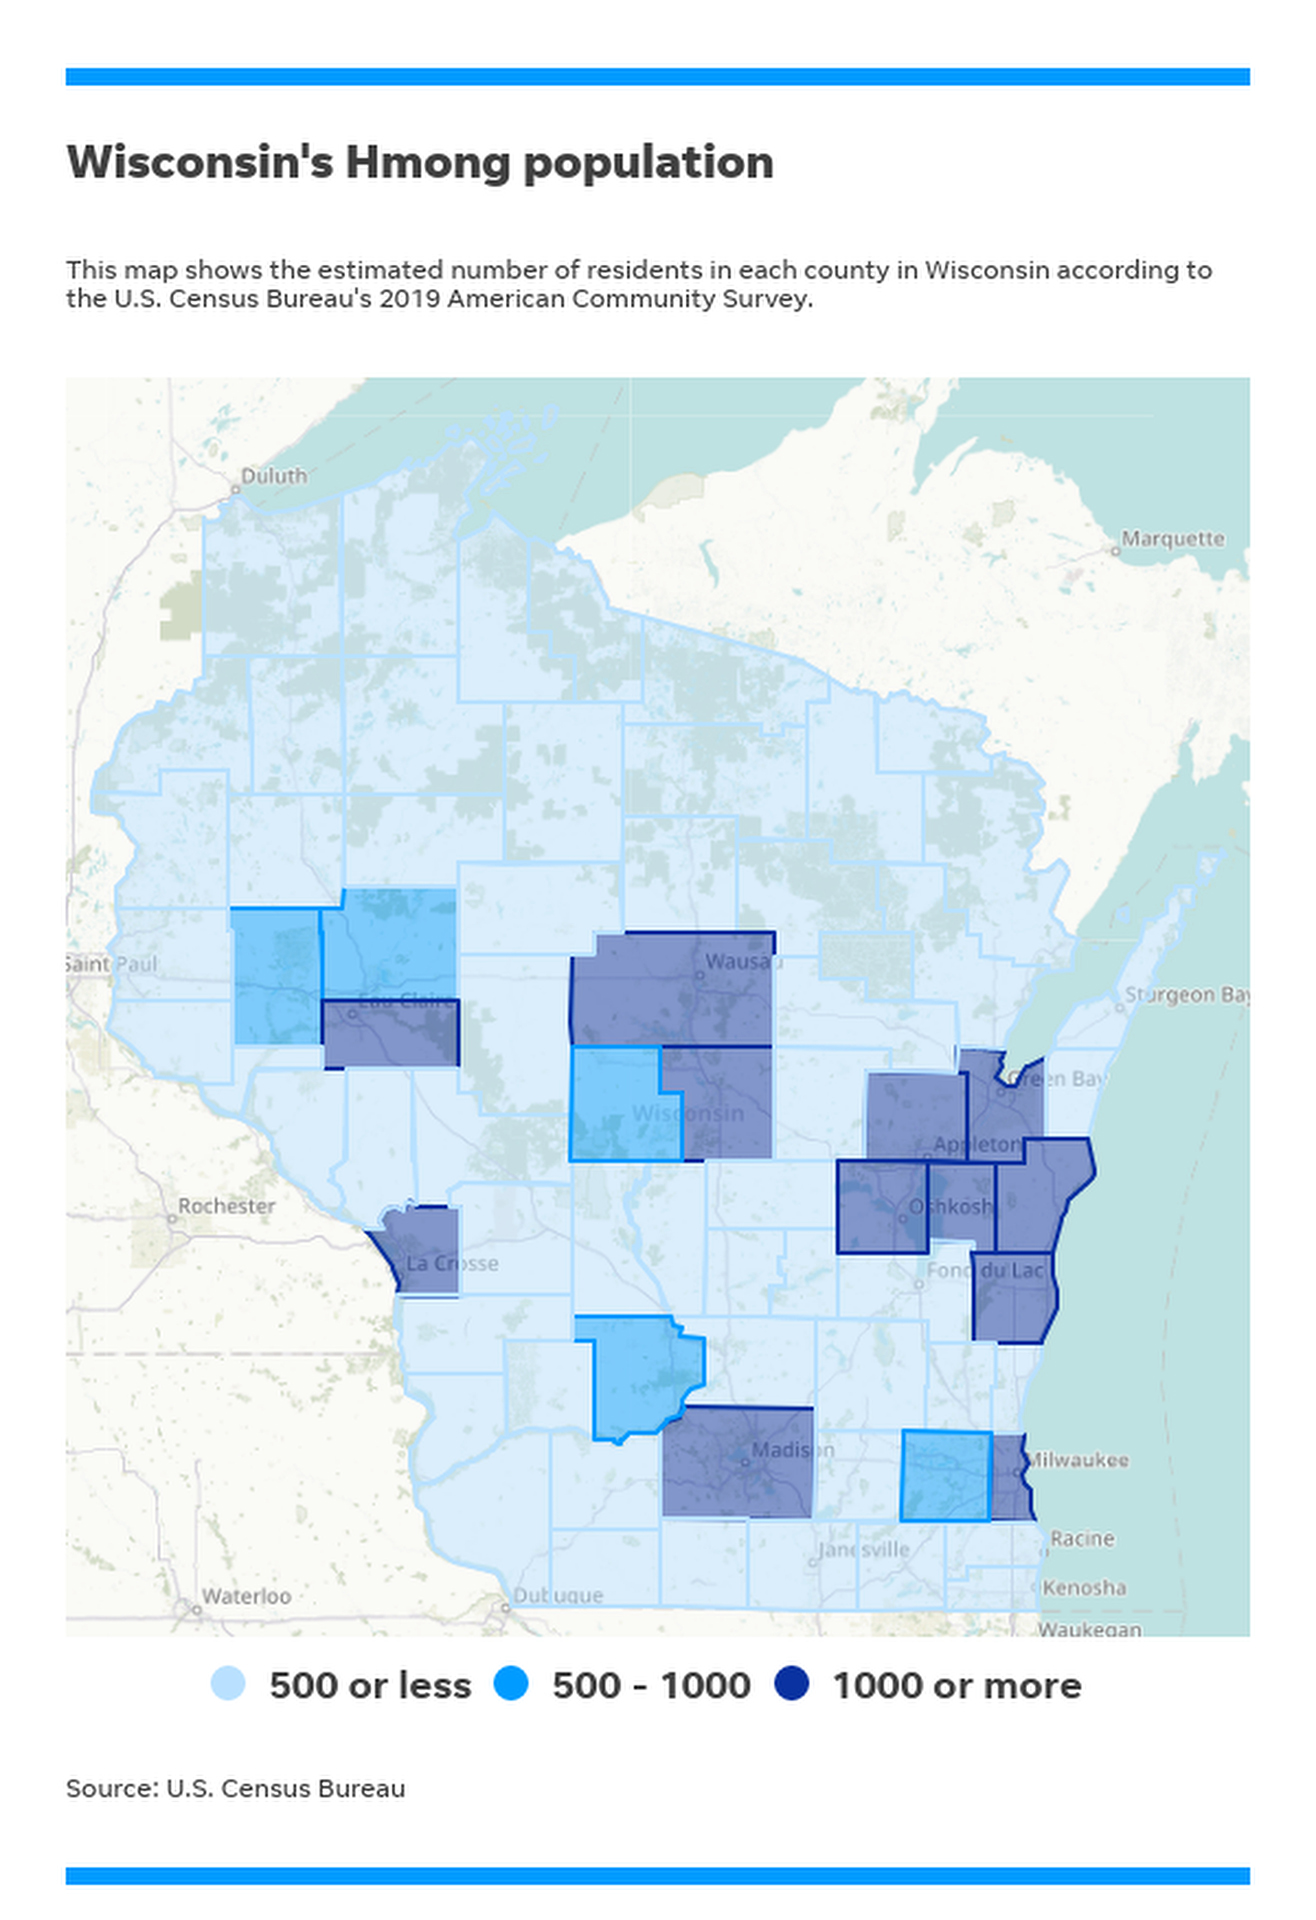 A map of Wisconsin features the title "WWisconsin's Hmong population" and the subtitle "This map shows the estimated number of residents in each county in Wisconsin according to the U.S. Census Bureau's 2019 American Community Survey."